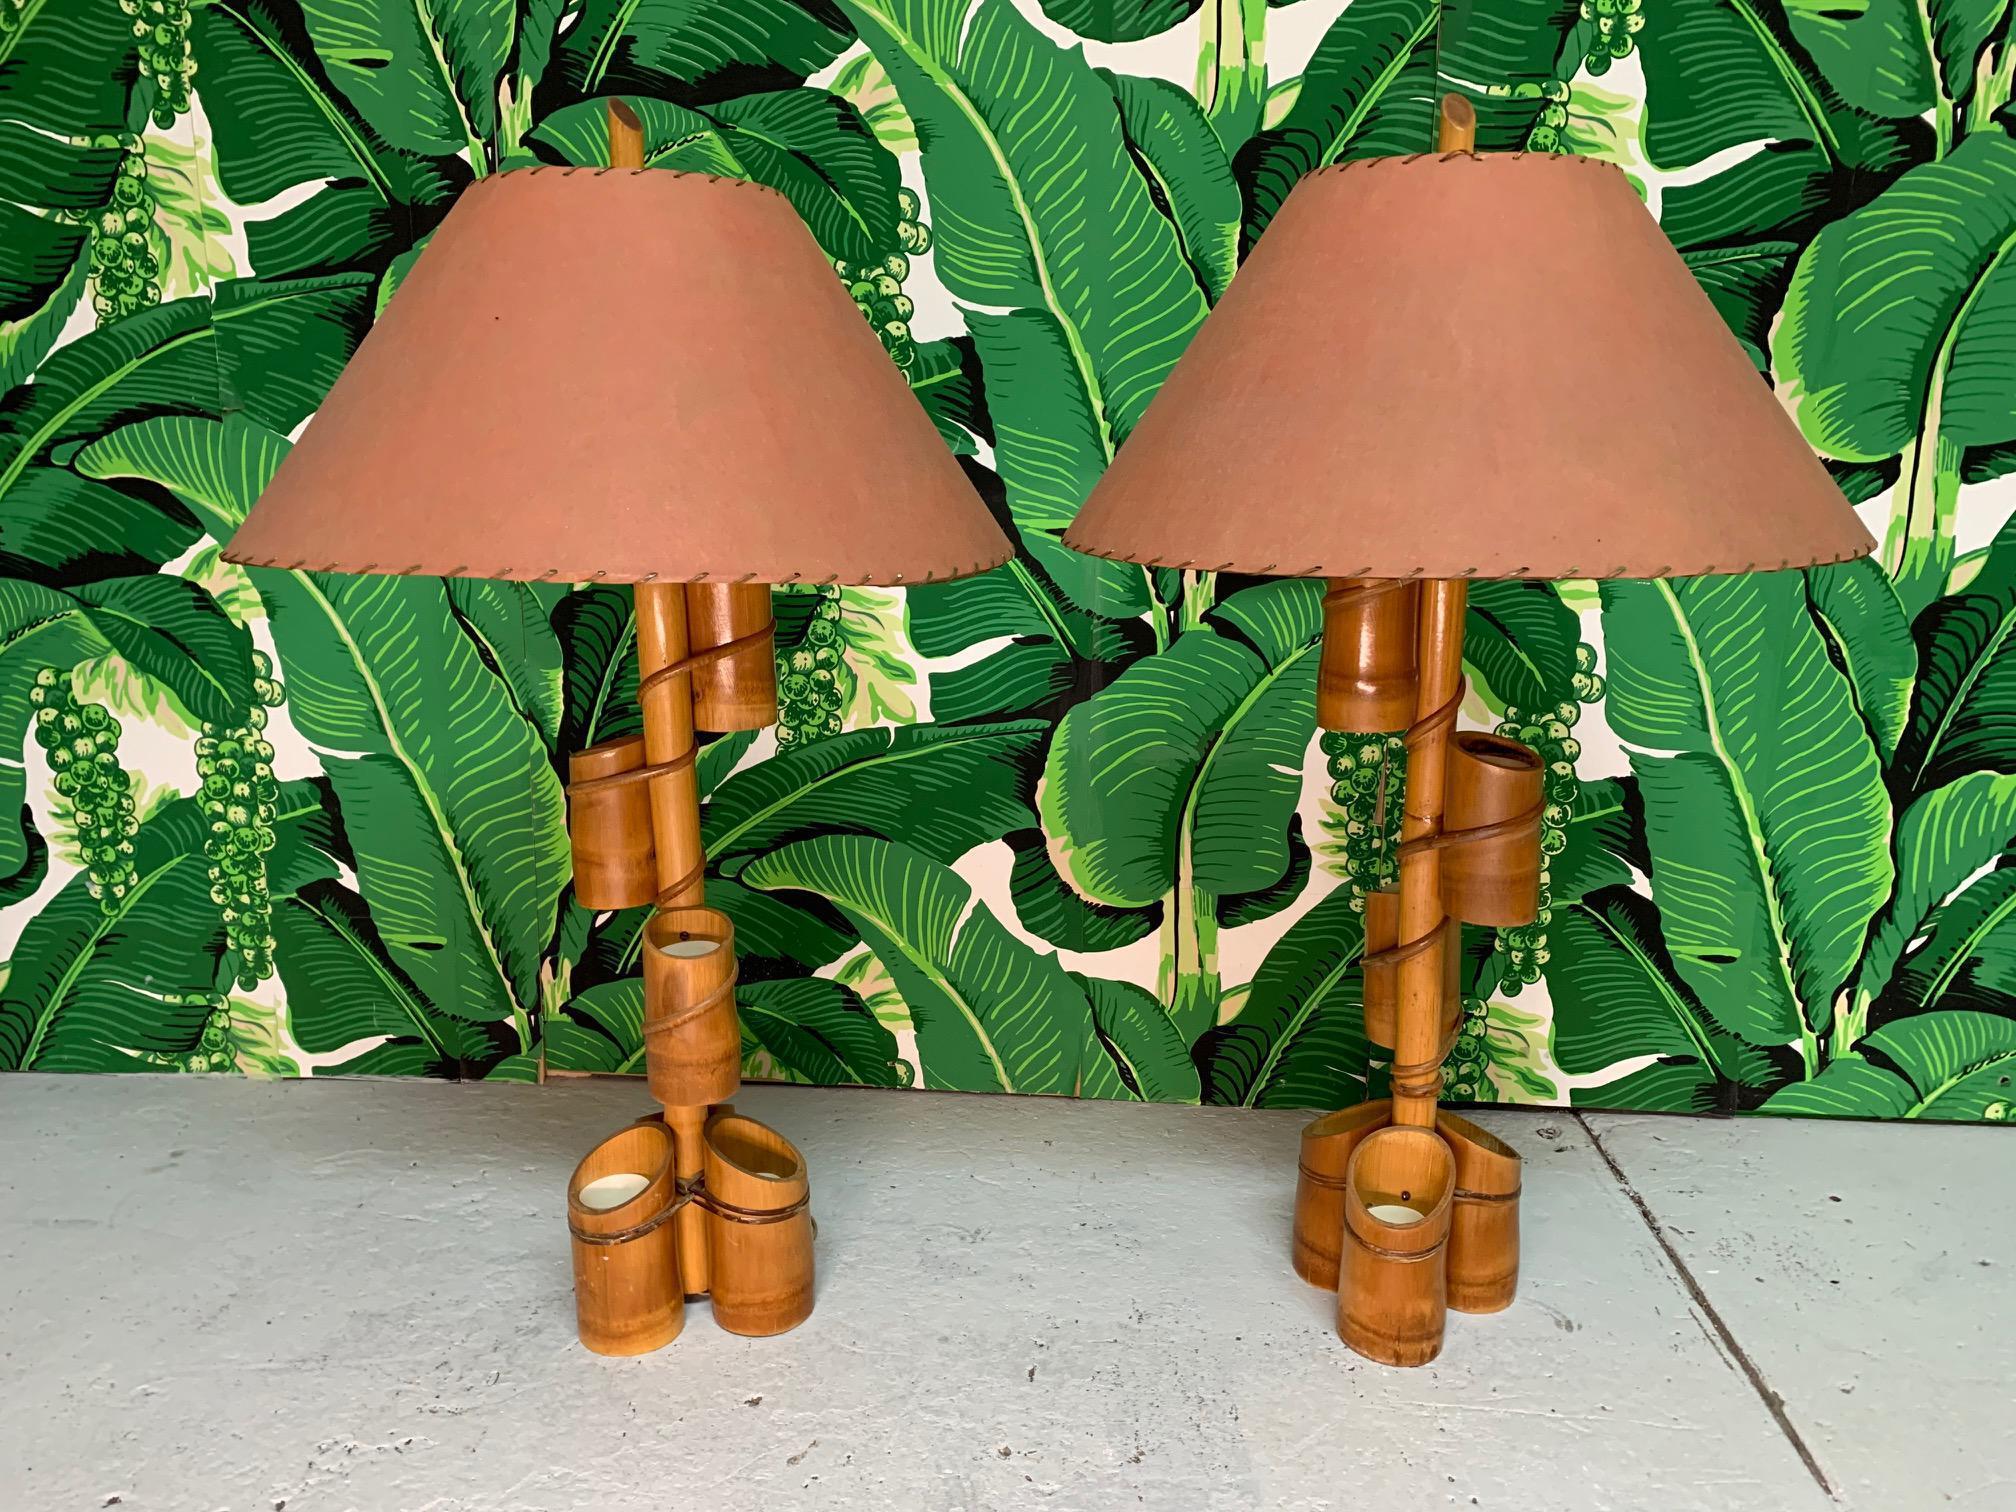 Pair of 1950's Tiki style table lamps feature a bamboo body and fiberglass parchment shades. The main shaft is adorned with small bamboo planters with plastic inserts, perfect for succulents or small bright flowers. Good condition with imperfections